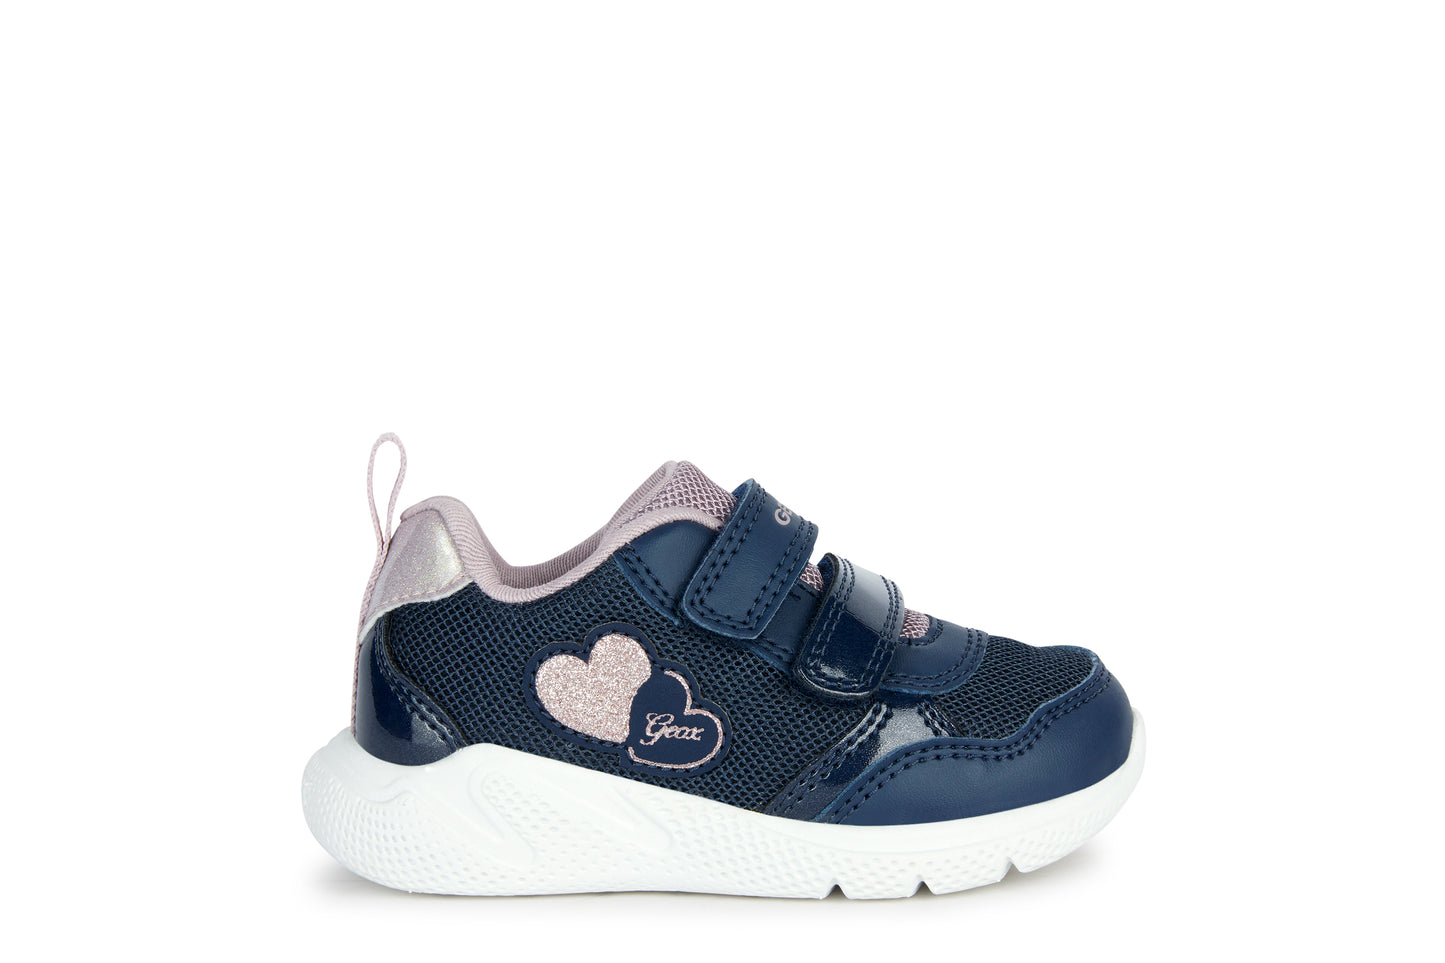 A girls trainer by Geox, style Sprintye, in navy and rose with double velcro fastening. Right side view.